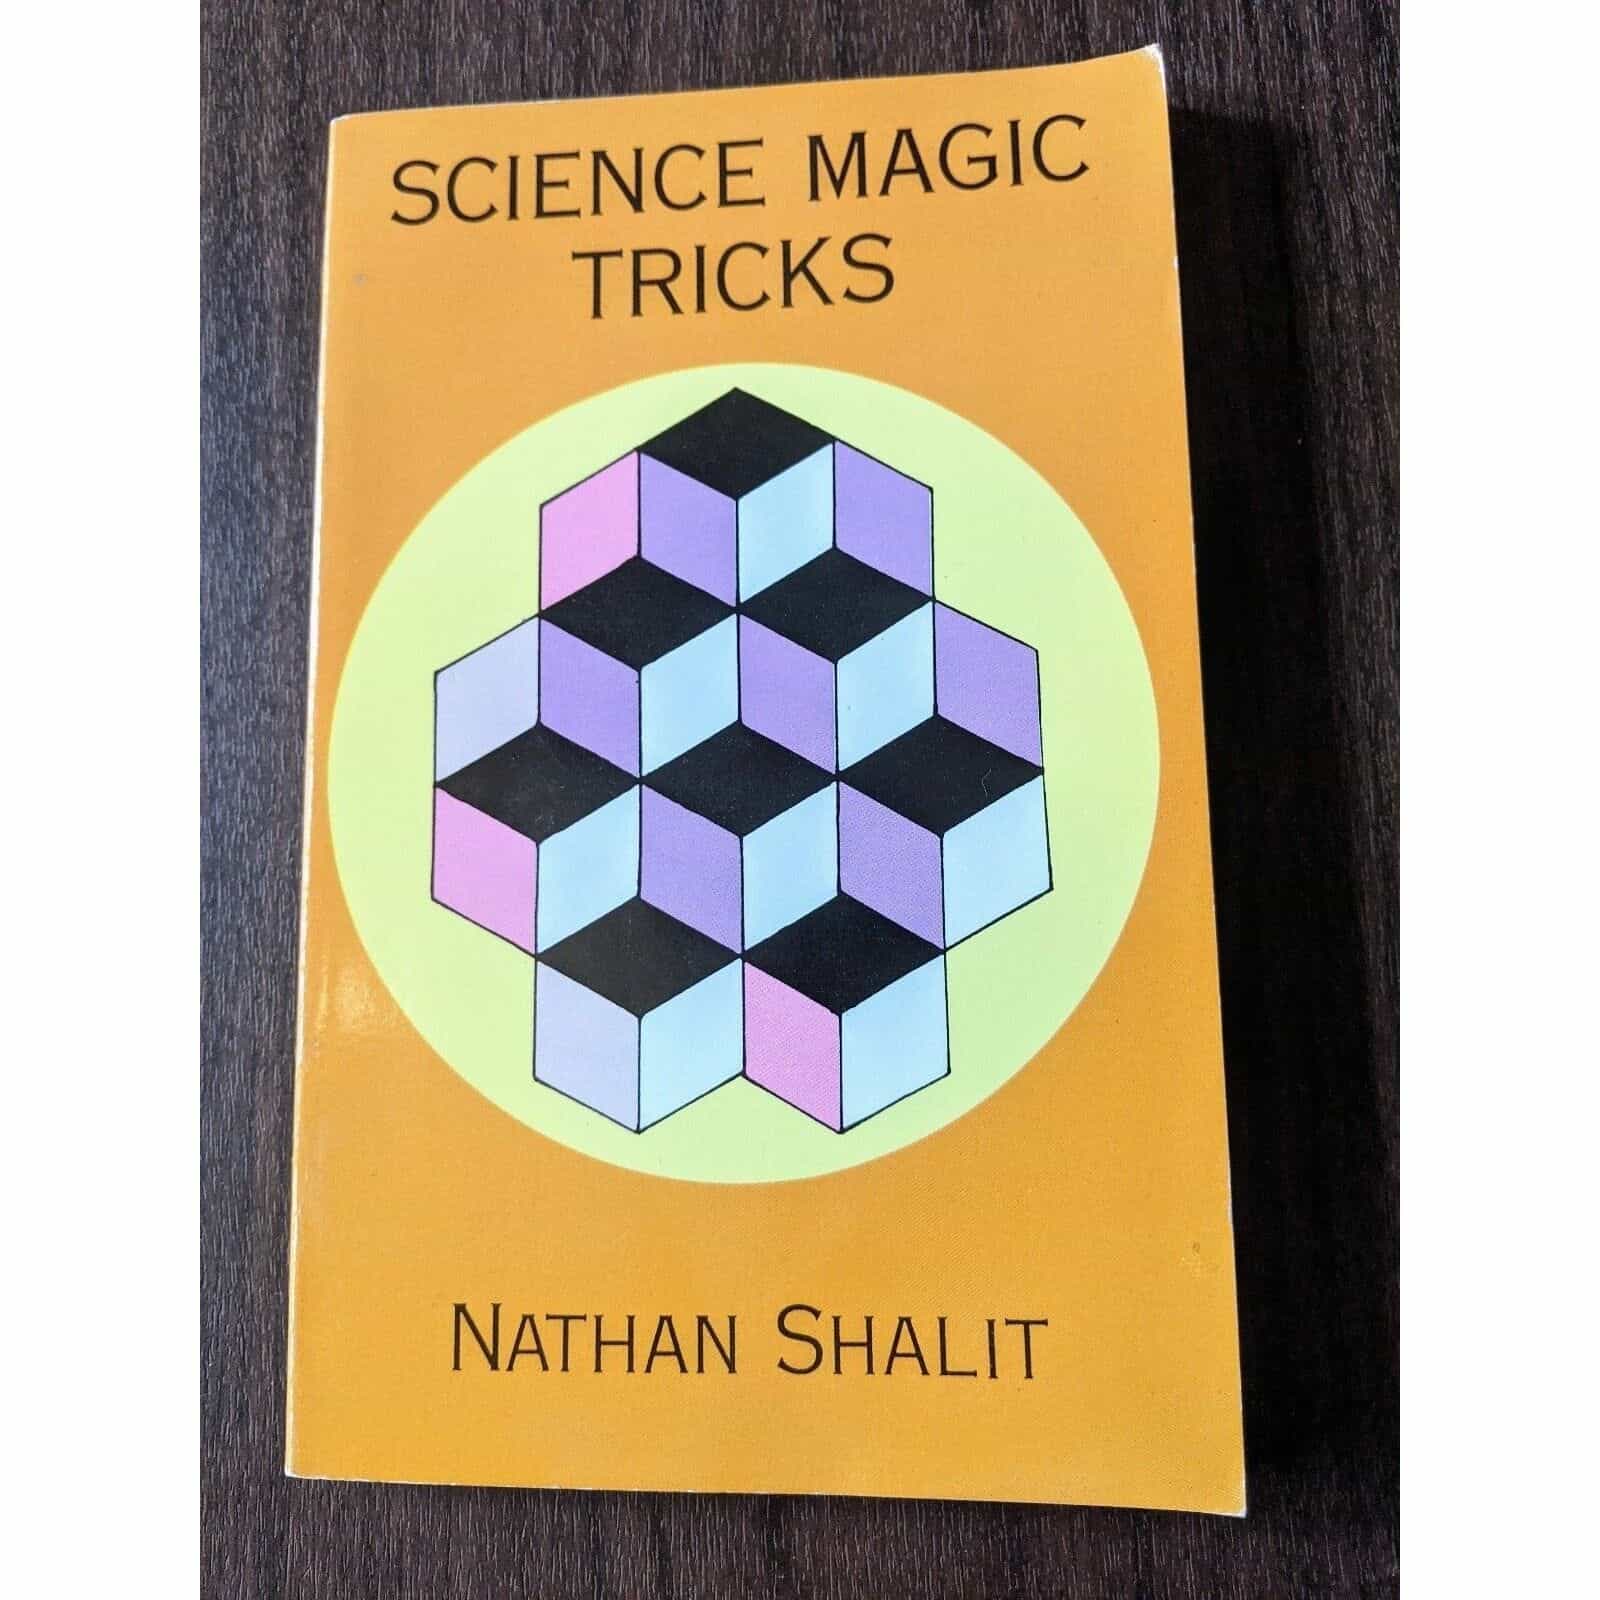 Science Magic Tricks by Nathan Shalit Book